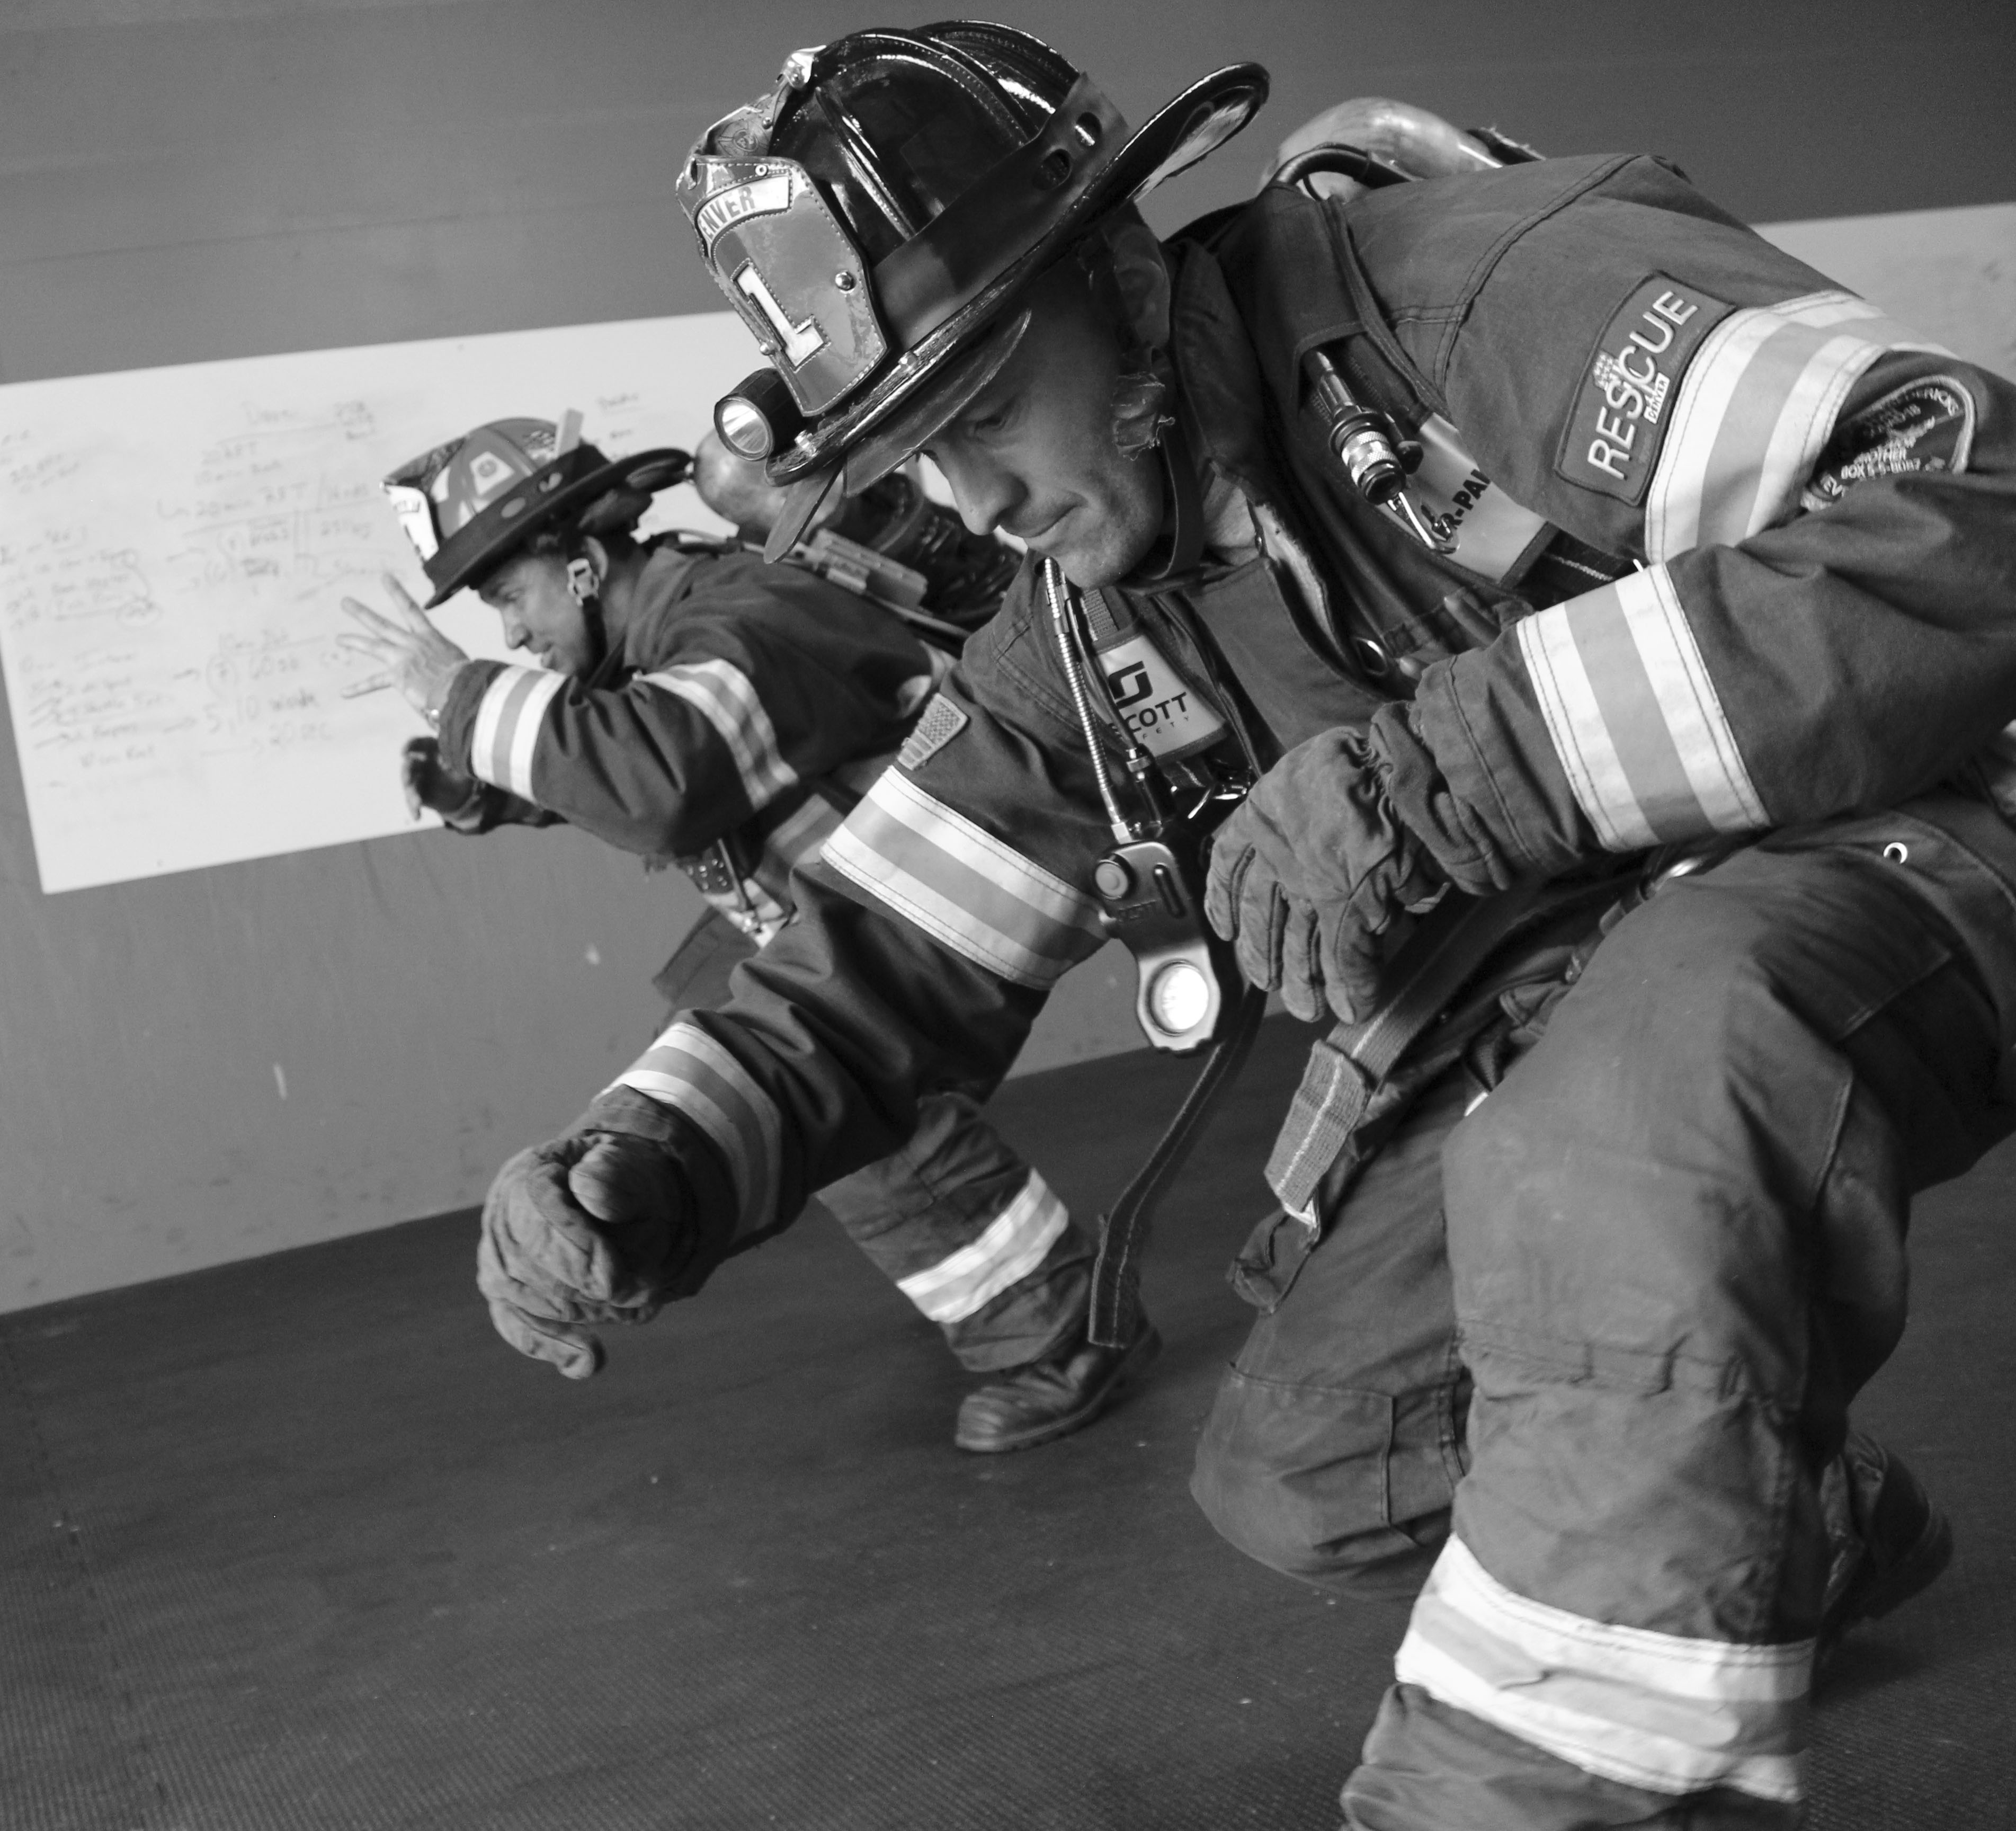 How To Choose A Training Plan – Fire/Rescue